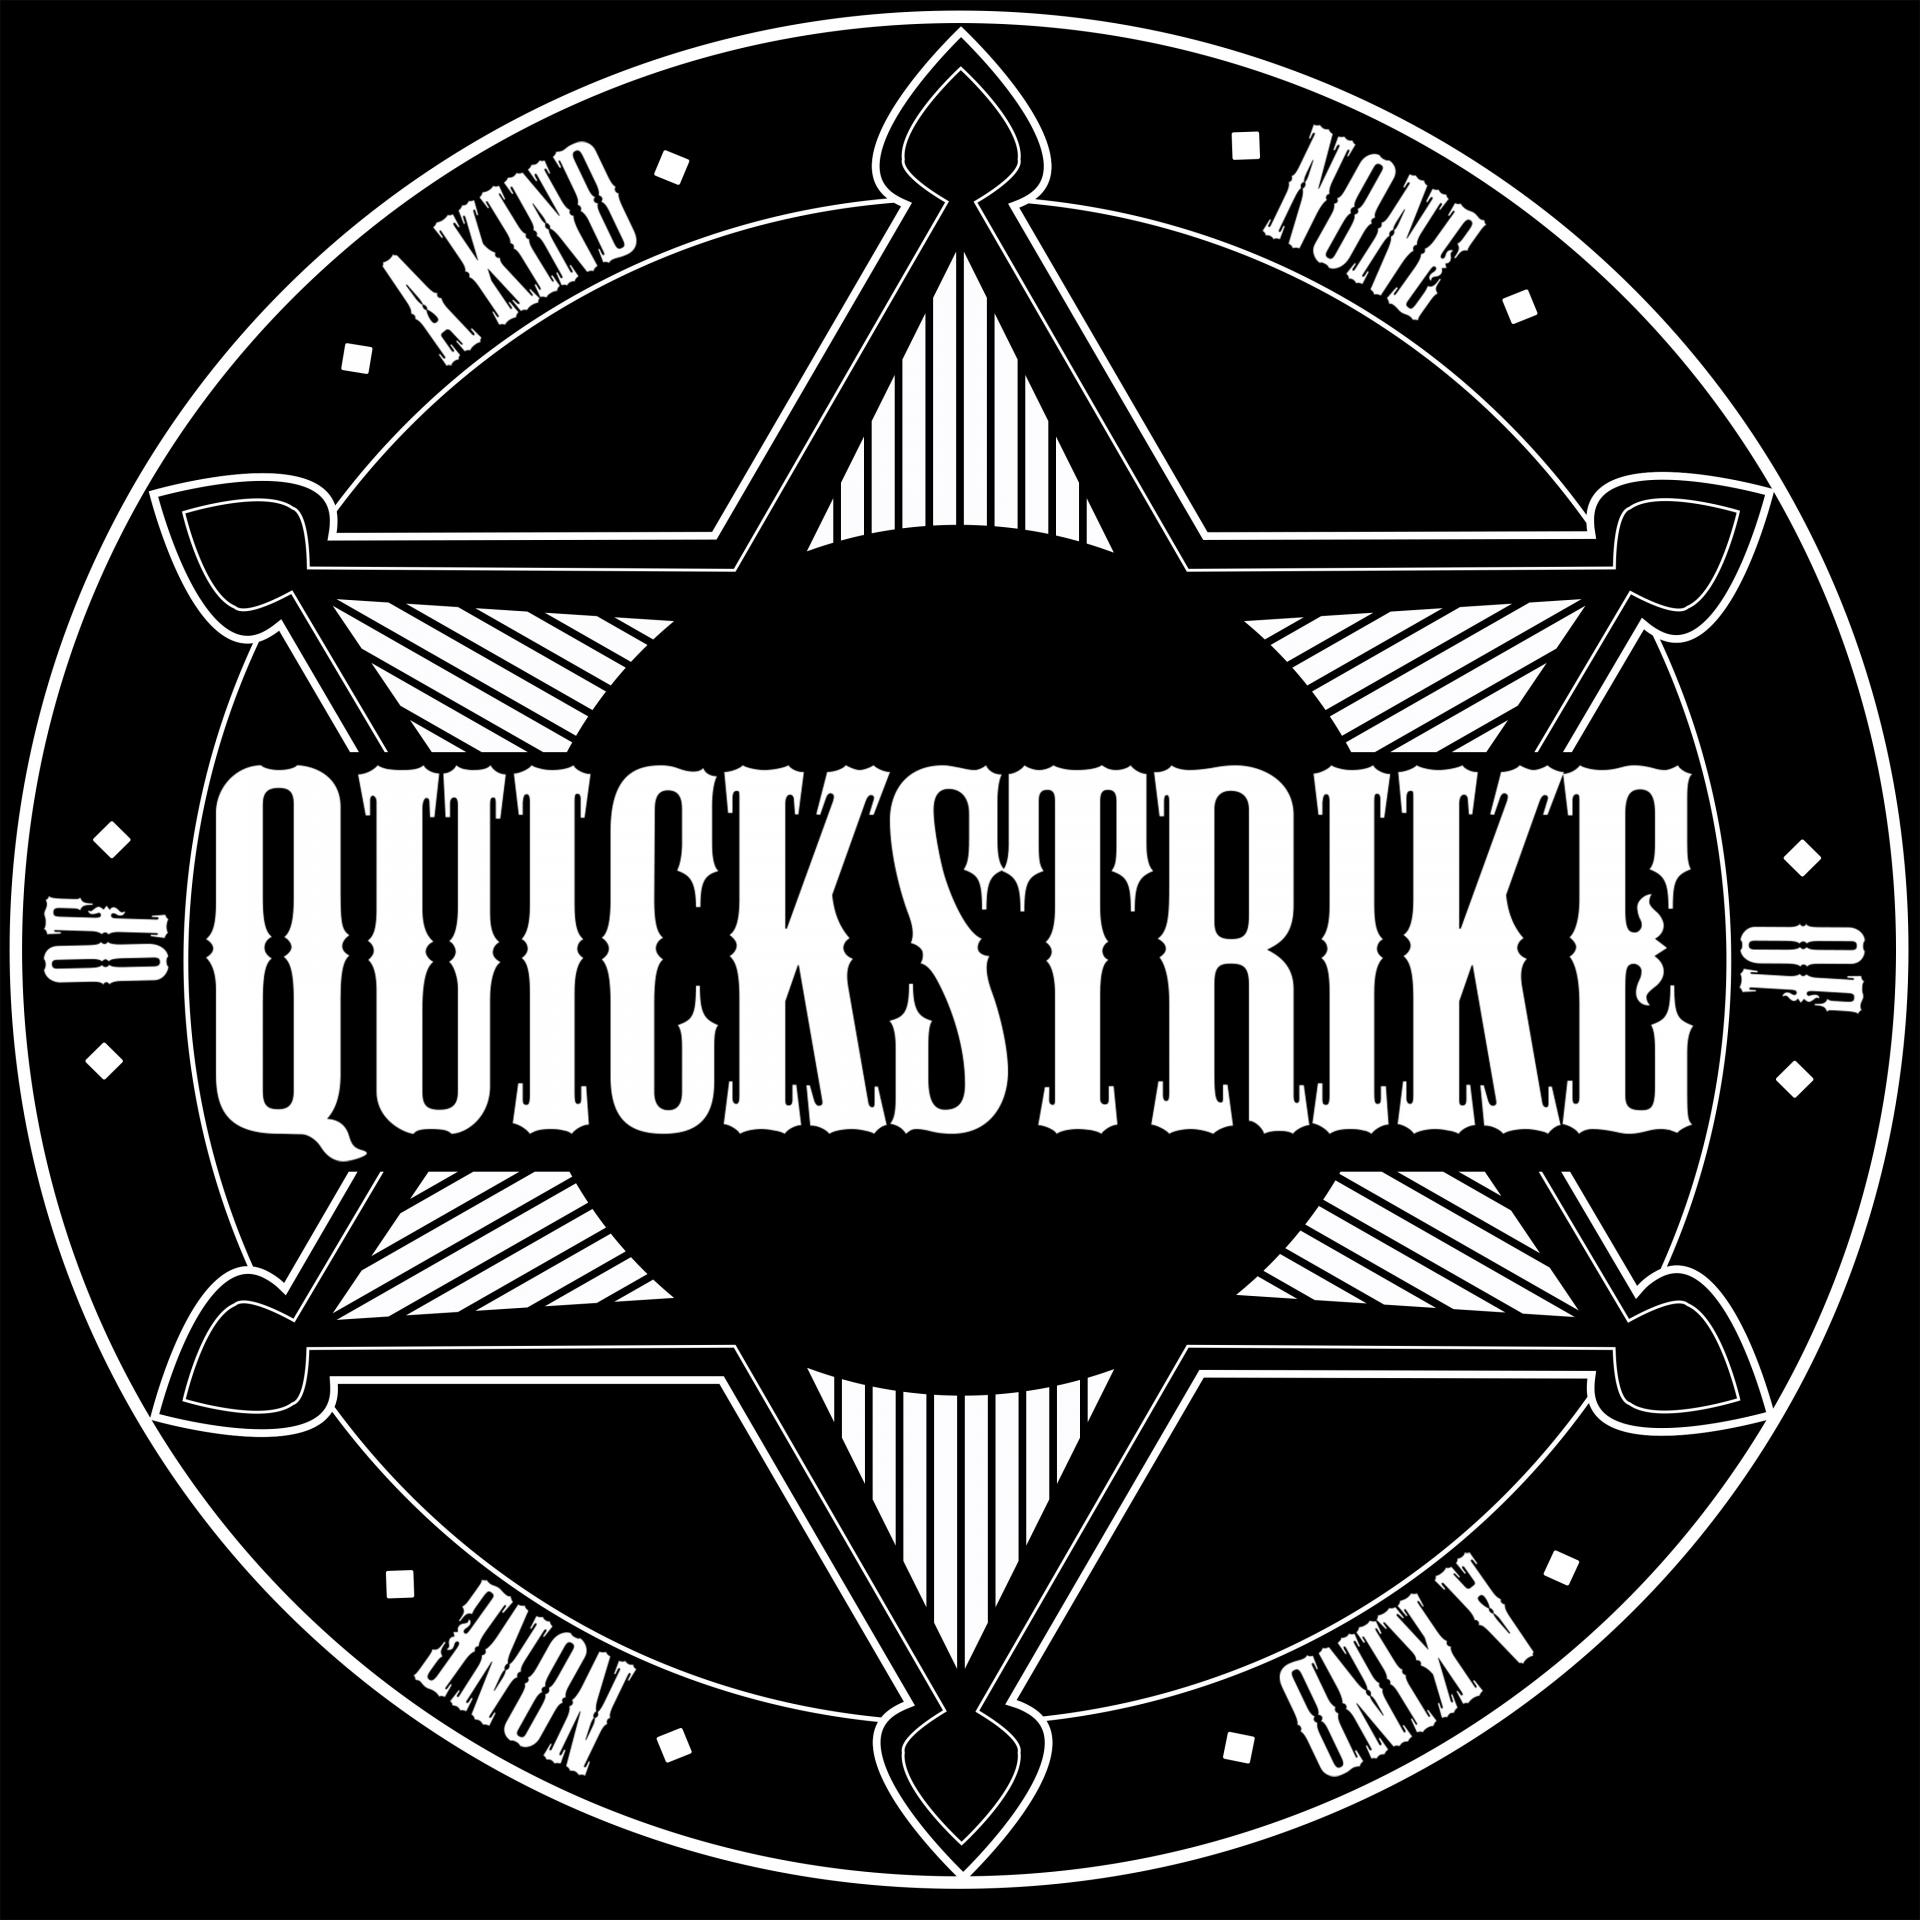 Quickstrike cover front